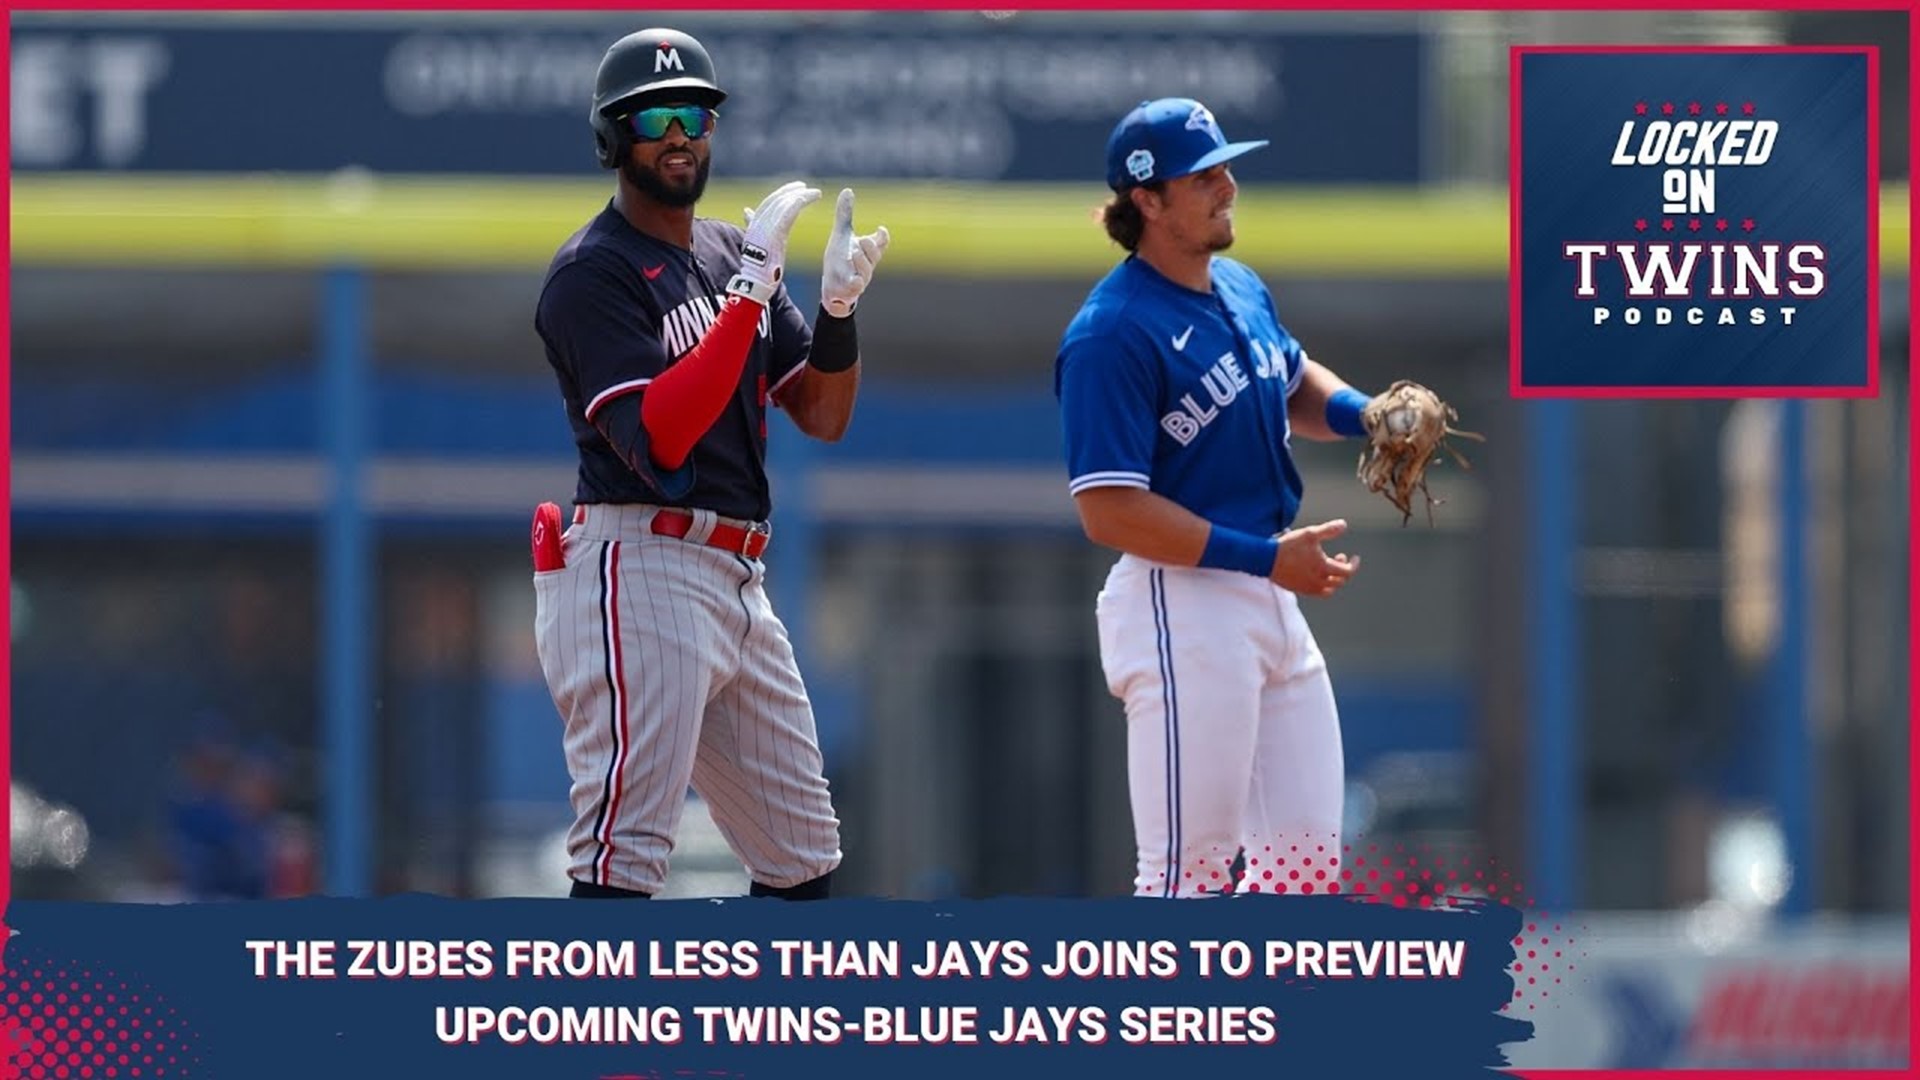 The Blue Jays are coming to town with Jose Berrios and friends, and we had Andrew Zuber (@theZubes) from Less than Jays to preview the upcoming series.